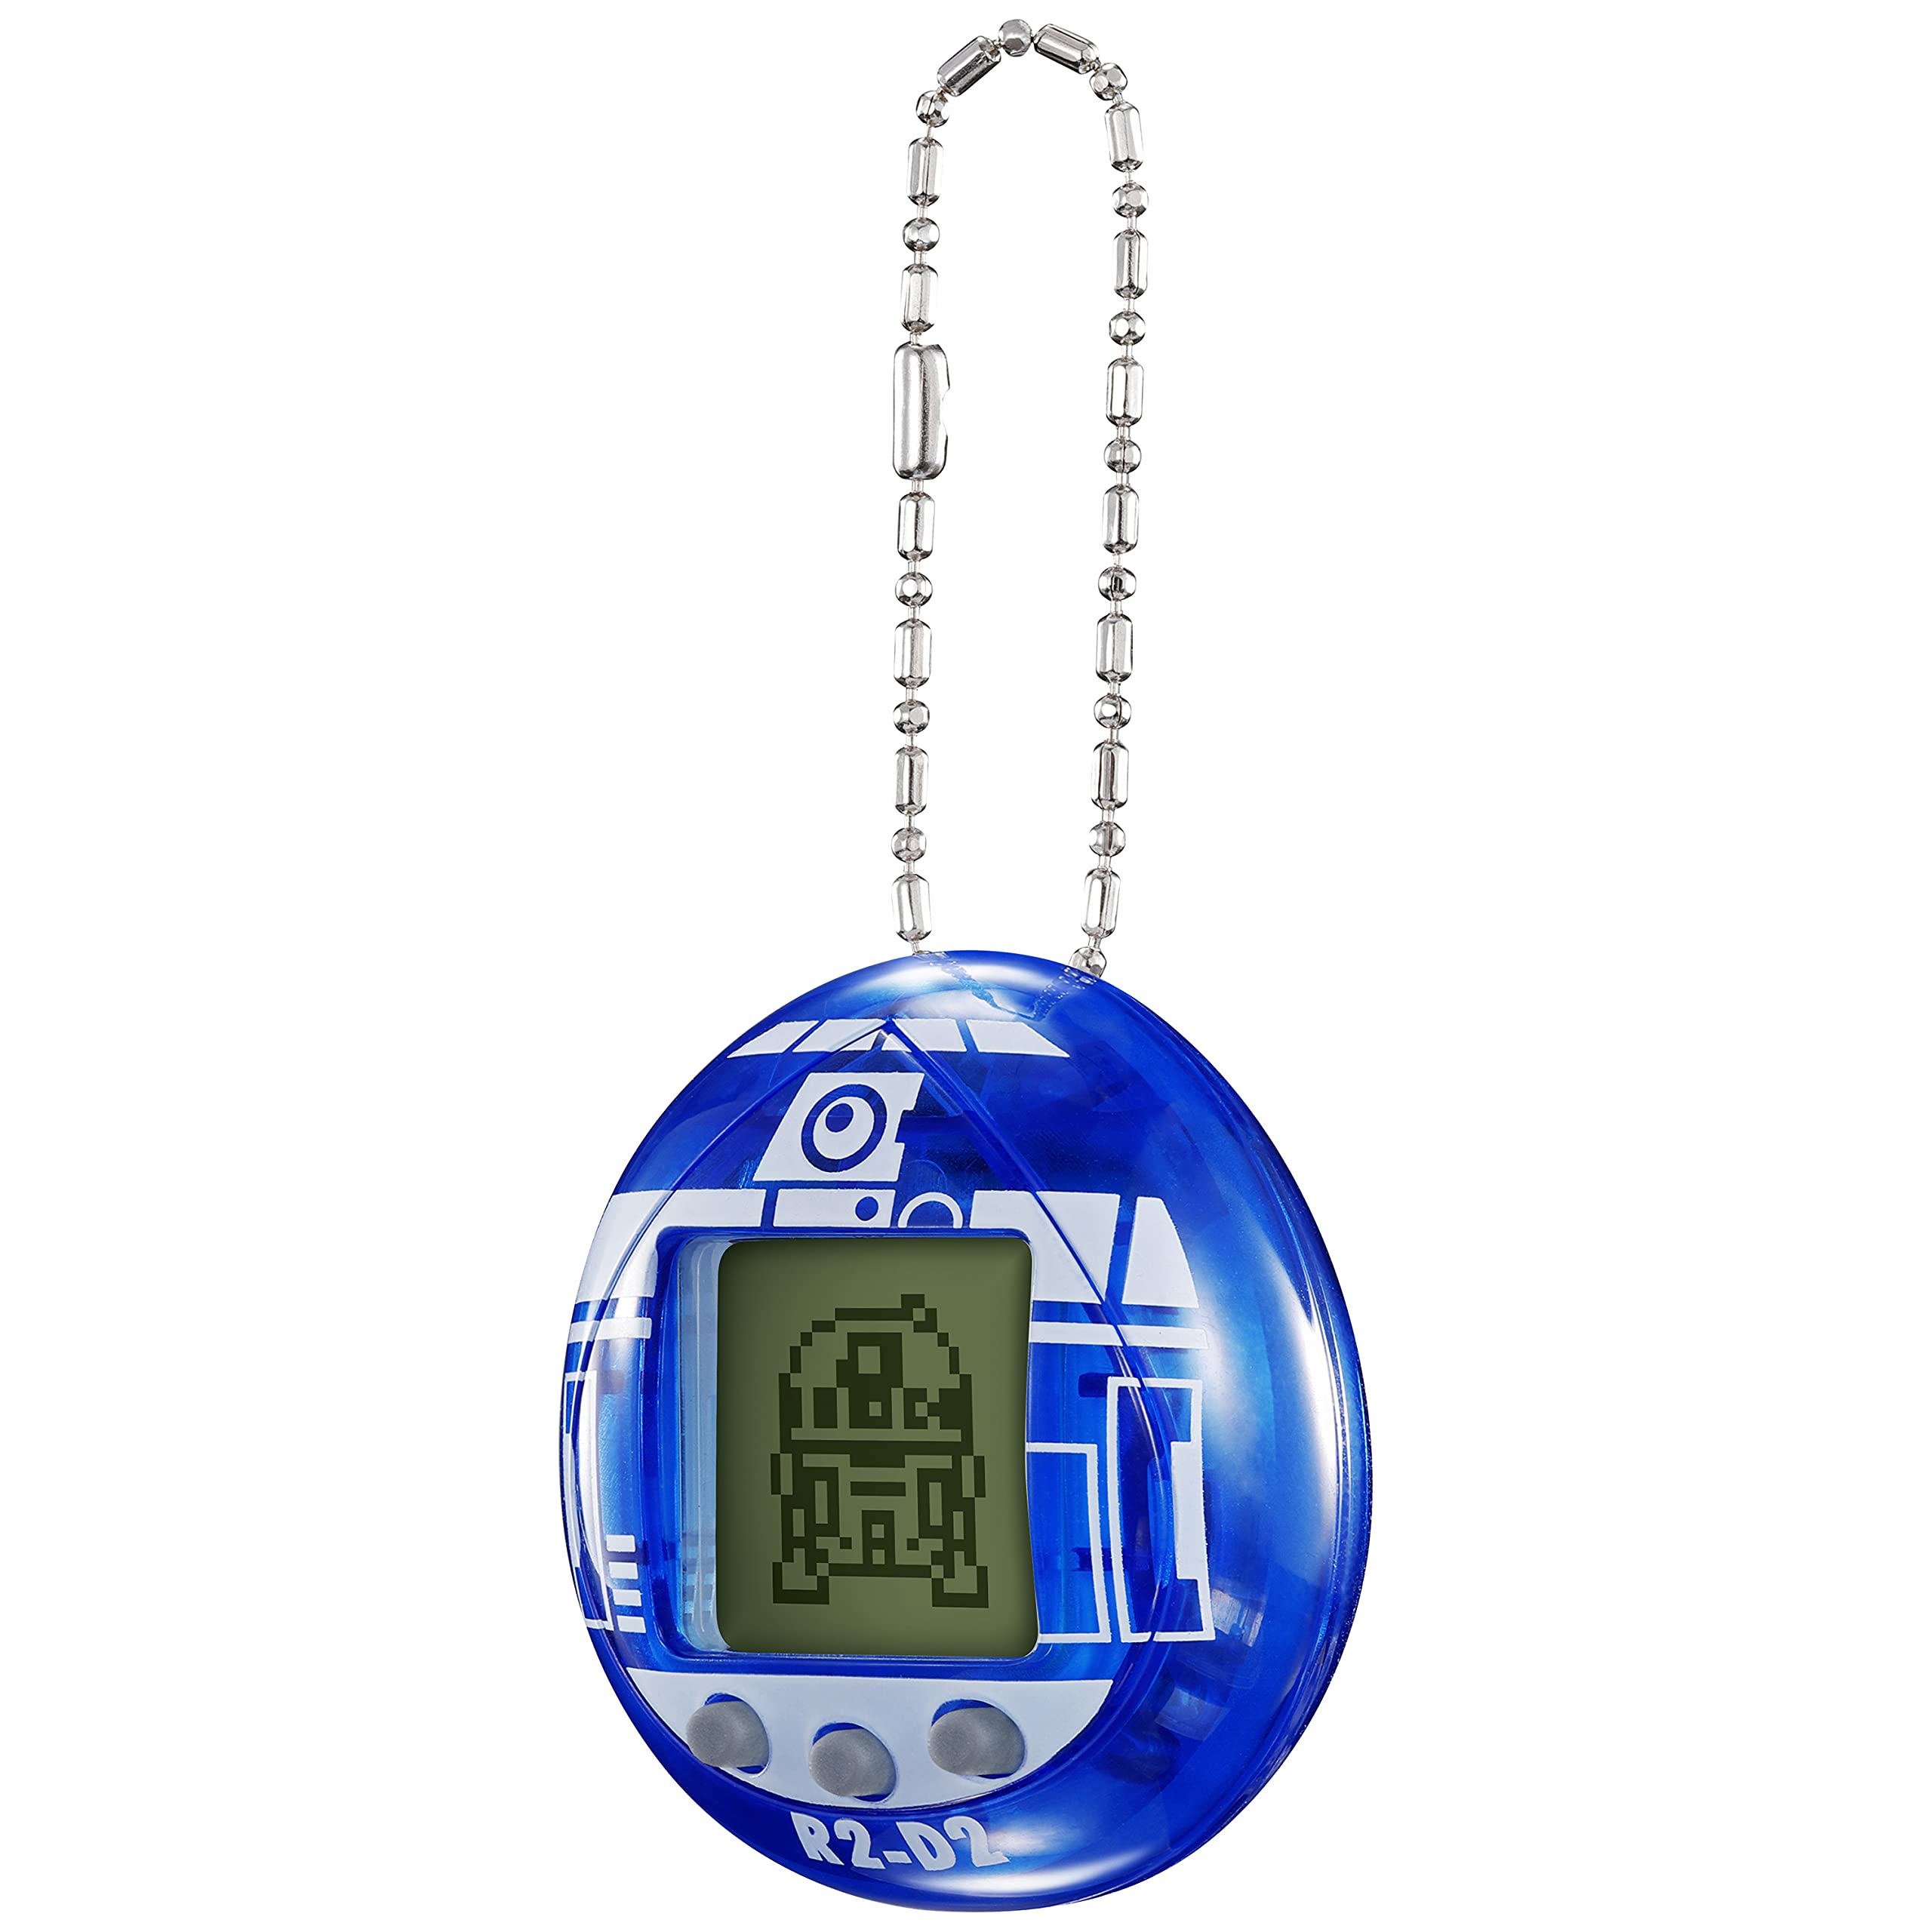 Tamagotchi 88822 Star Wars R2D2 Virtual Pet Droid with Mini-Games, Animated Clips, Extra Modes & Key Chain-(Blue), Multicolour